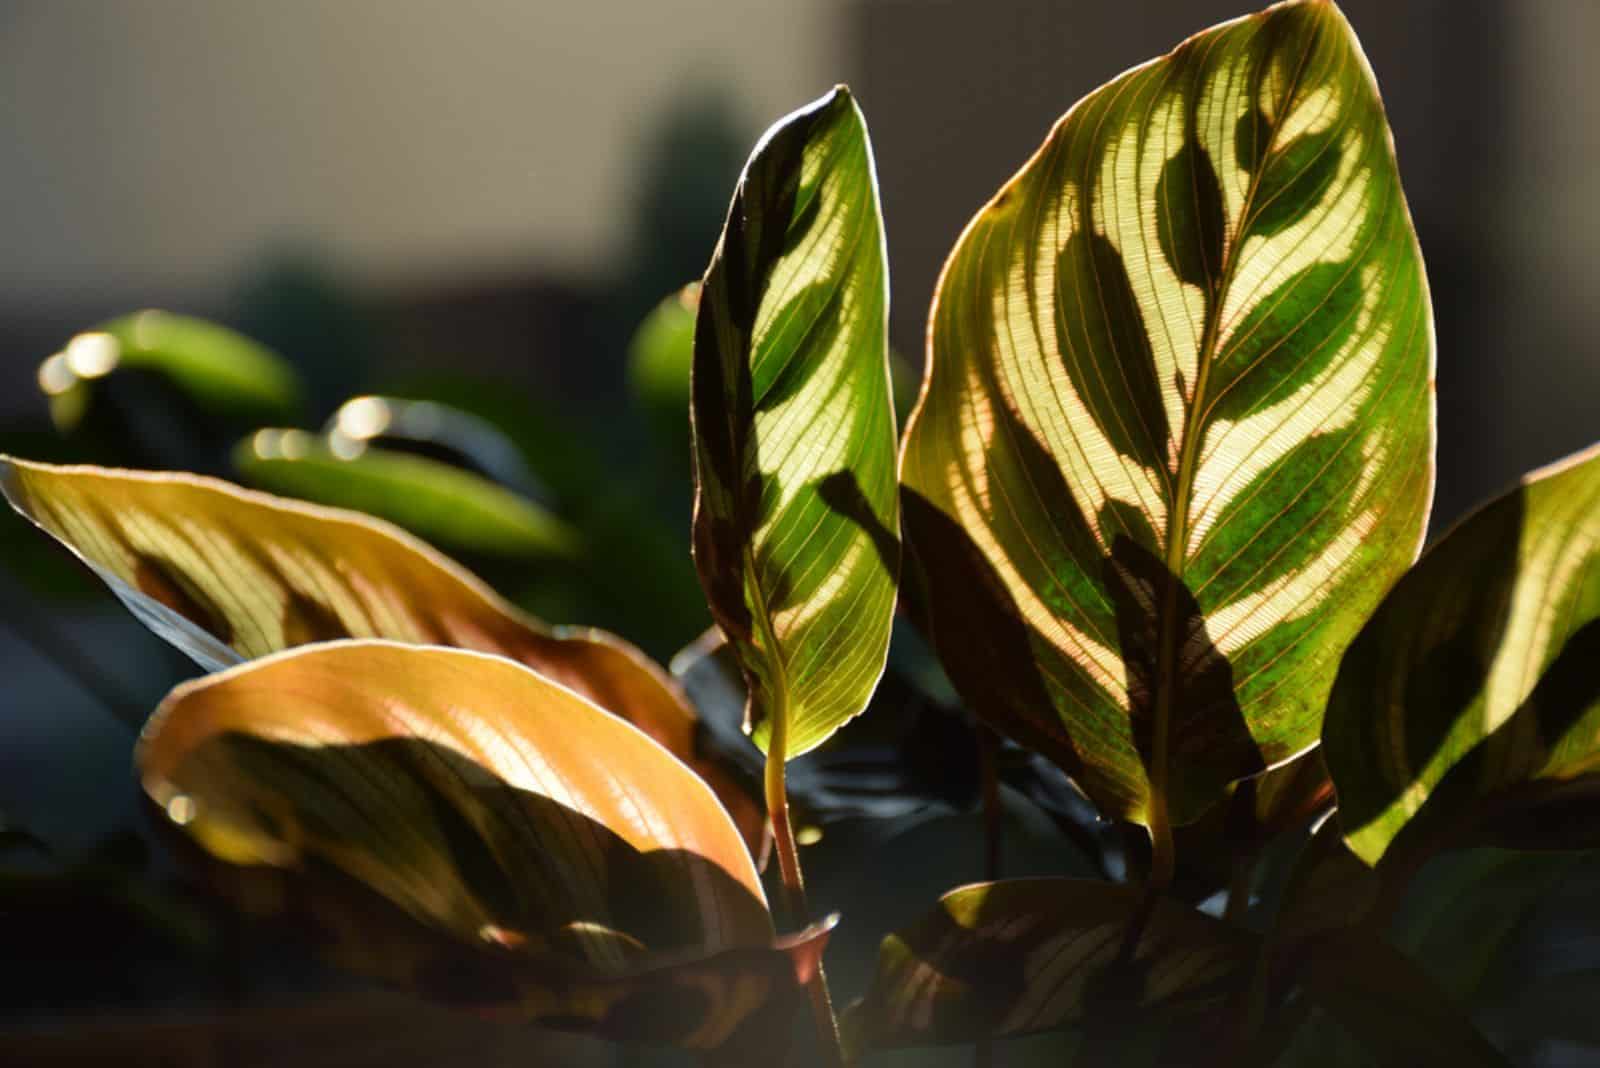 Calathea leaves ready to close up on night